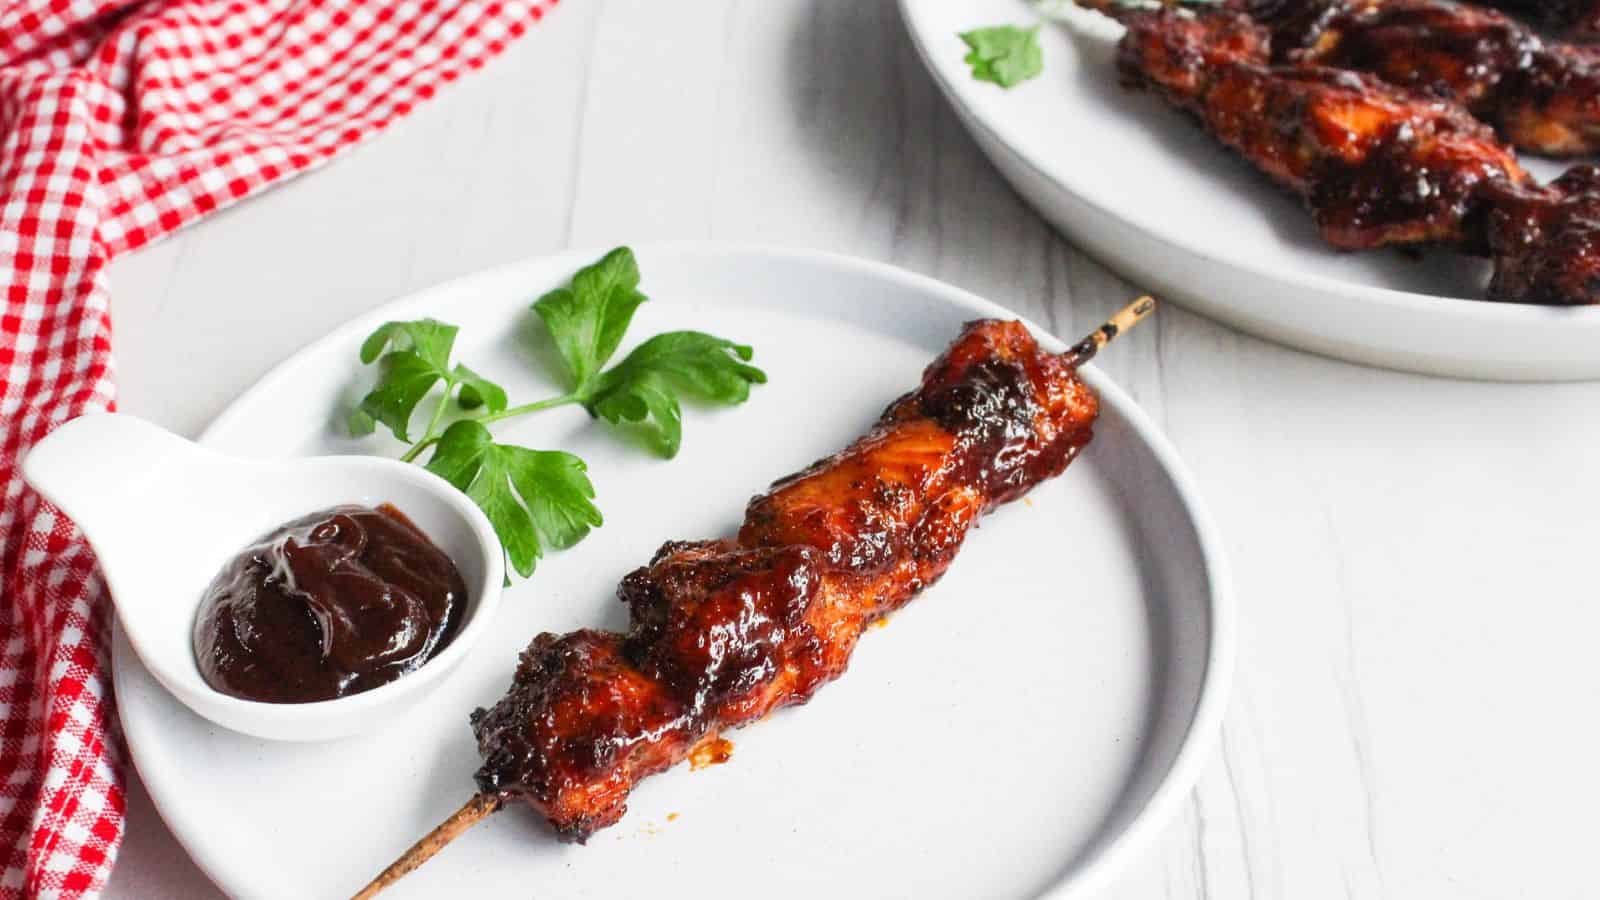 A grilled chicken skewer on a white plate with barbecue sauce and fresh parsley, beside a plate of more chicken skewers.